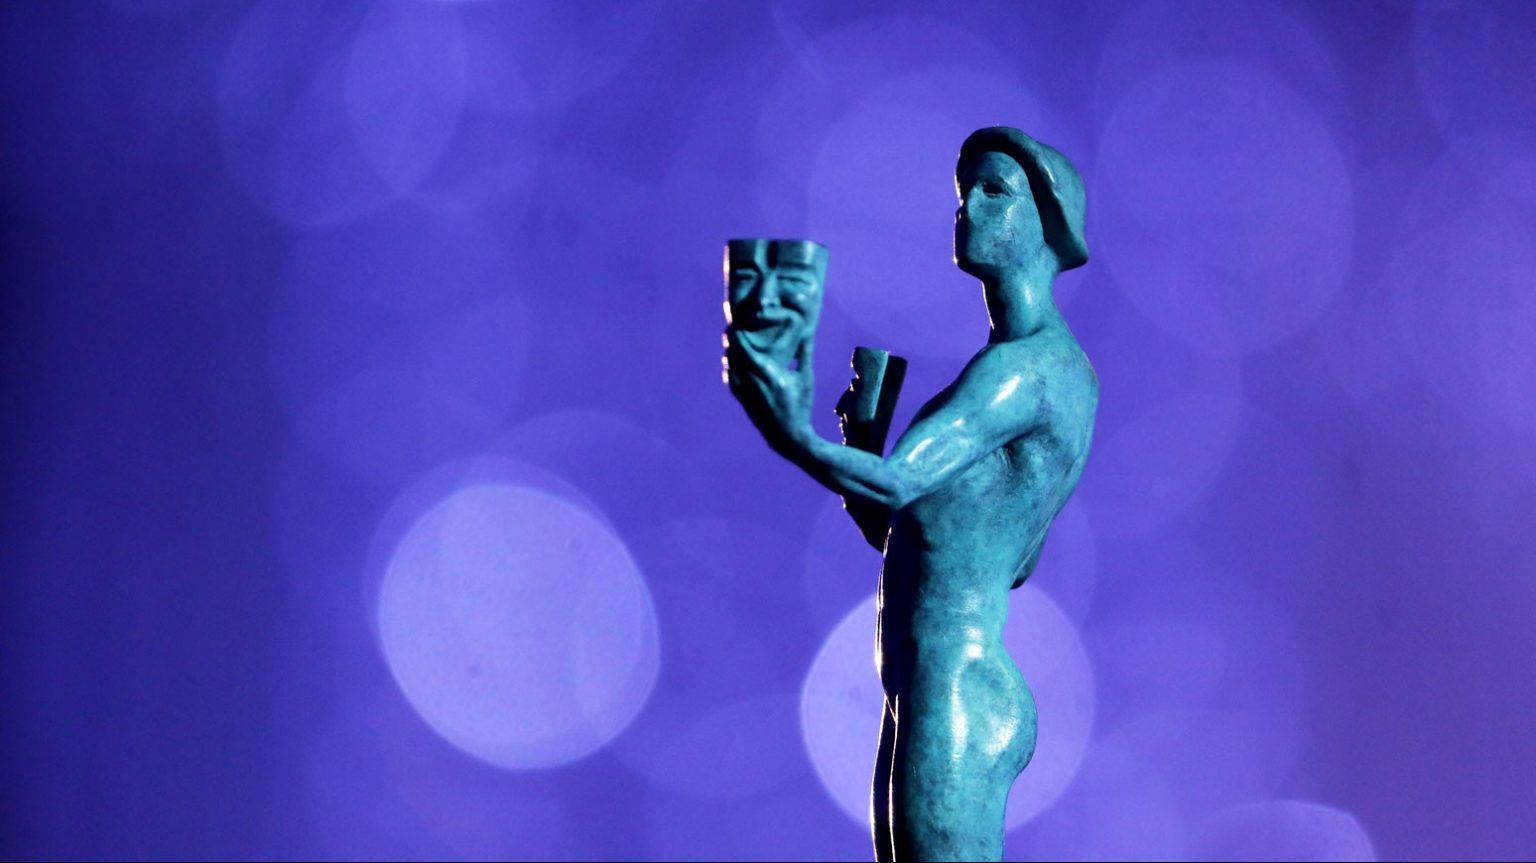 The bronze actor statue given to the winners at the 2021 SAG Awards.